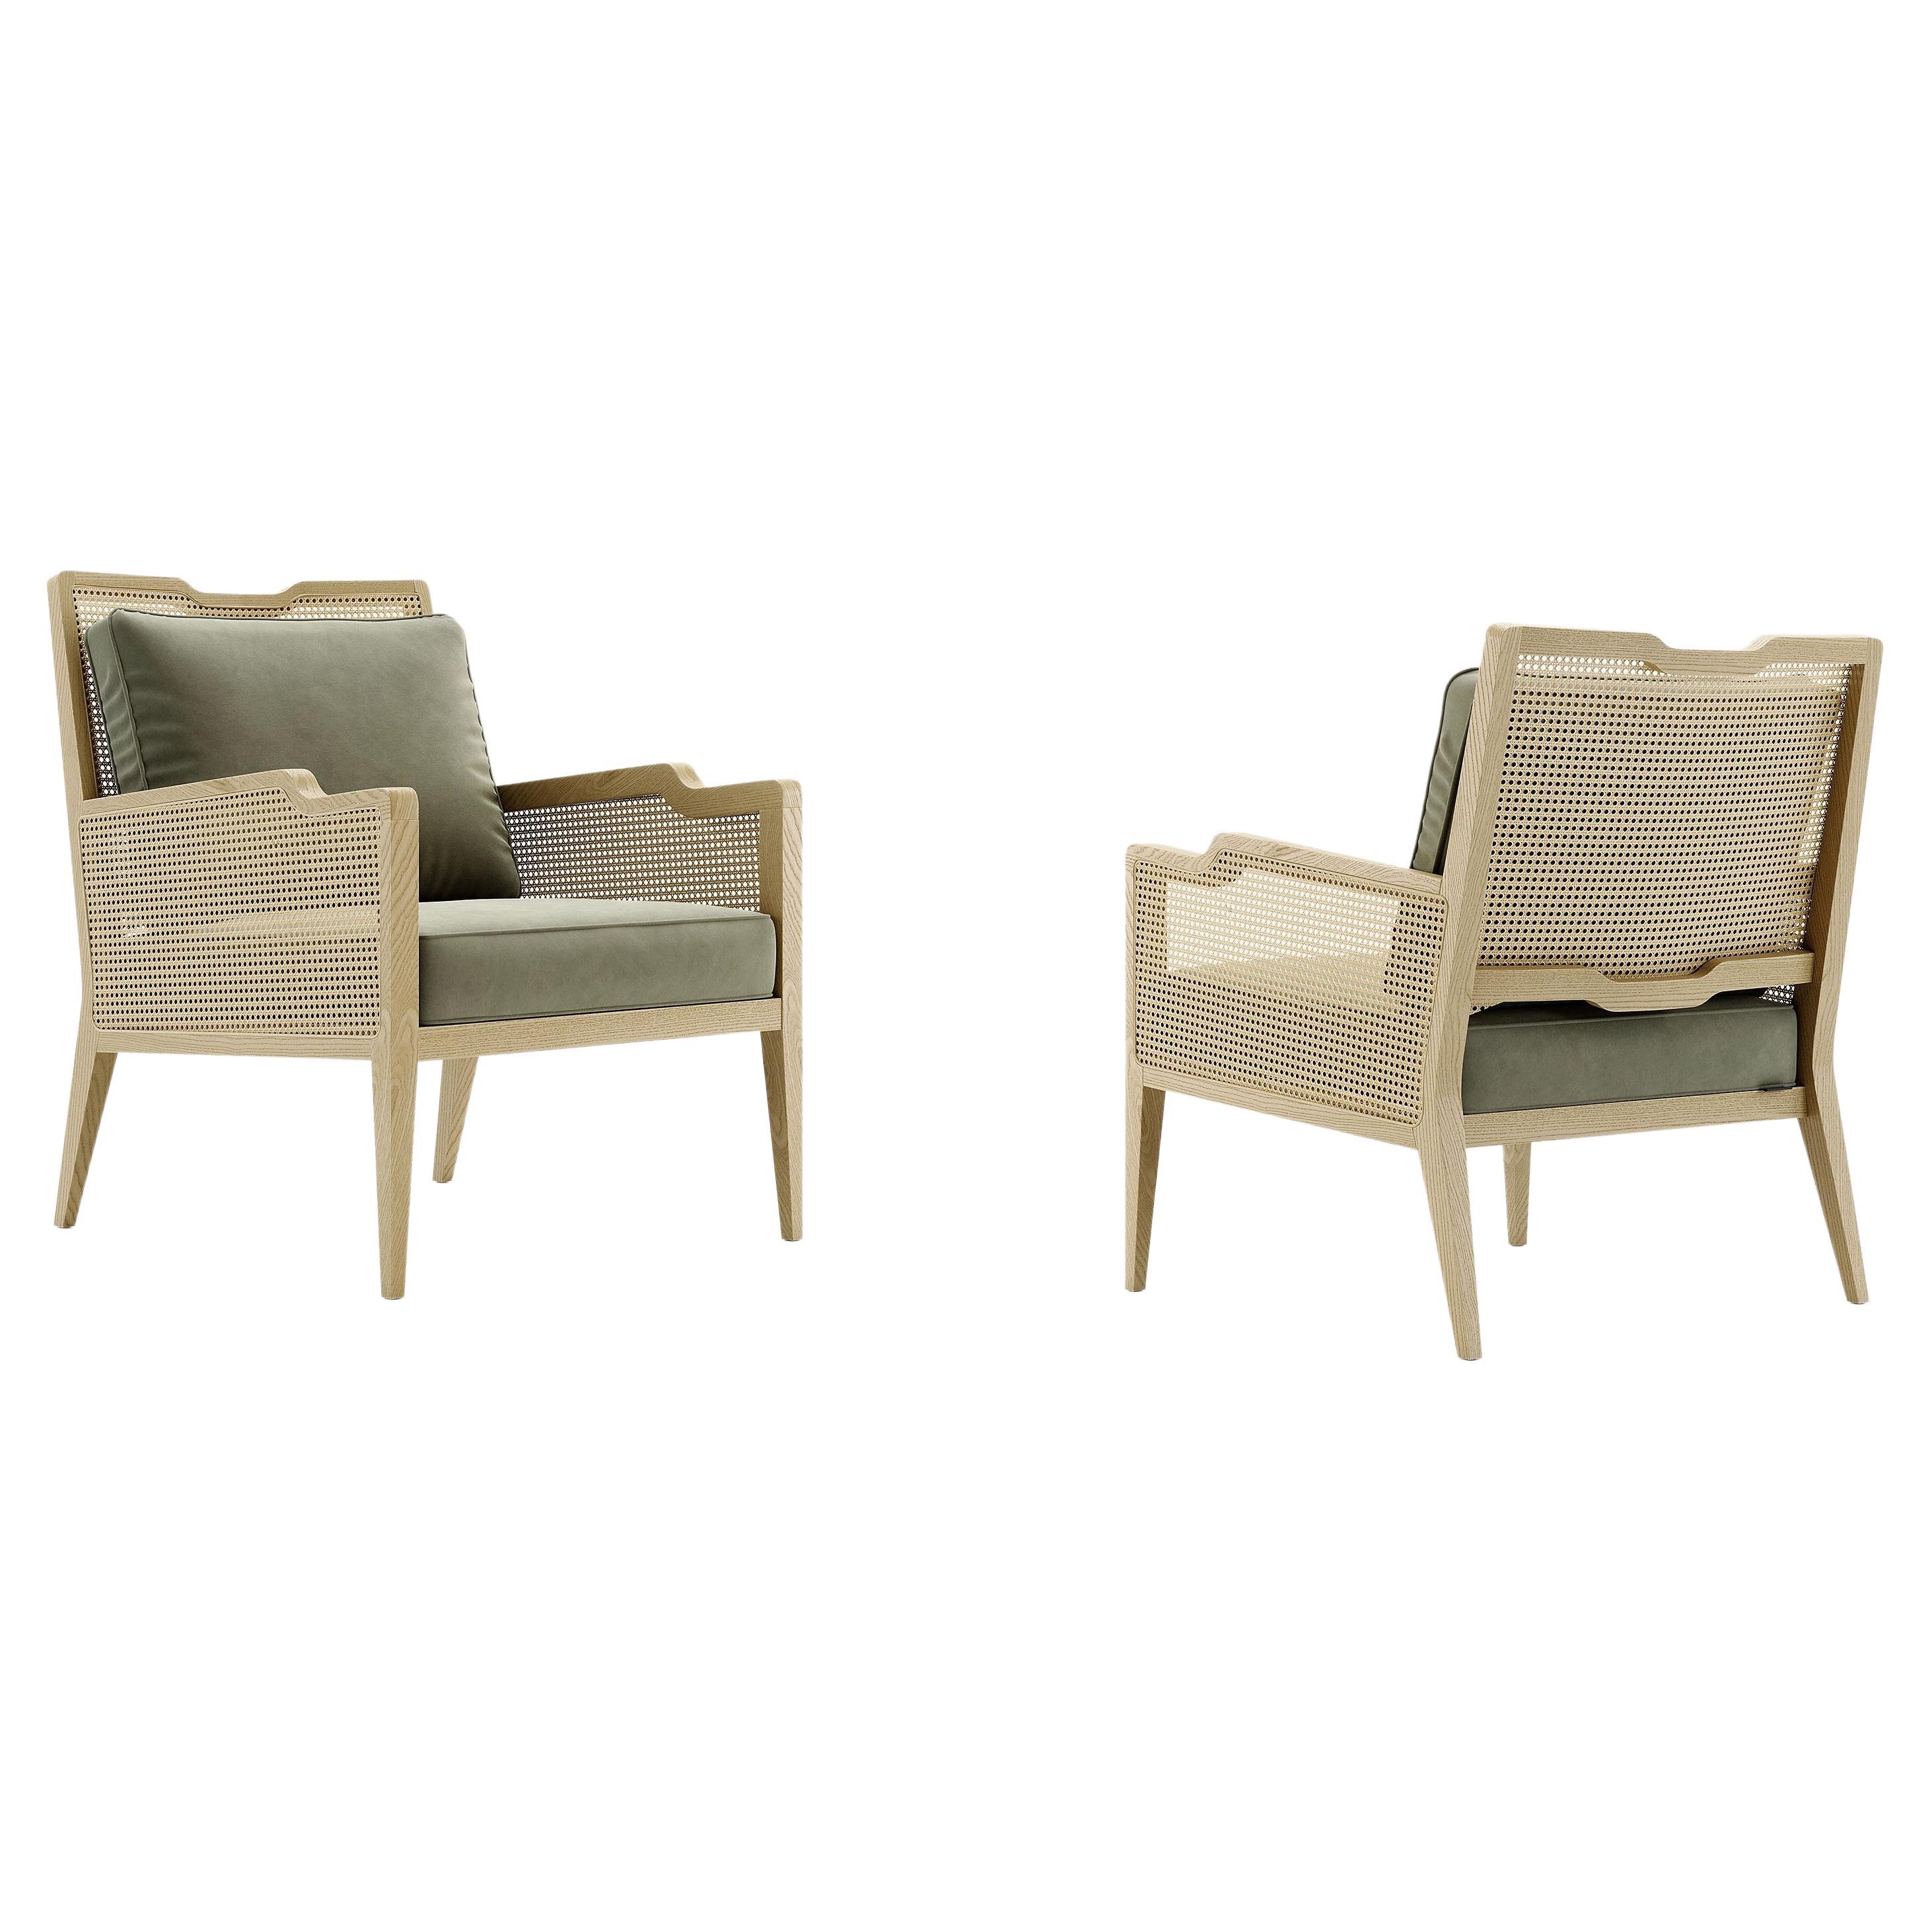 Two Contemporary Armchairs in Natural Woven Rattan